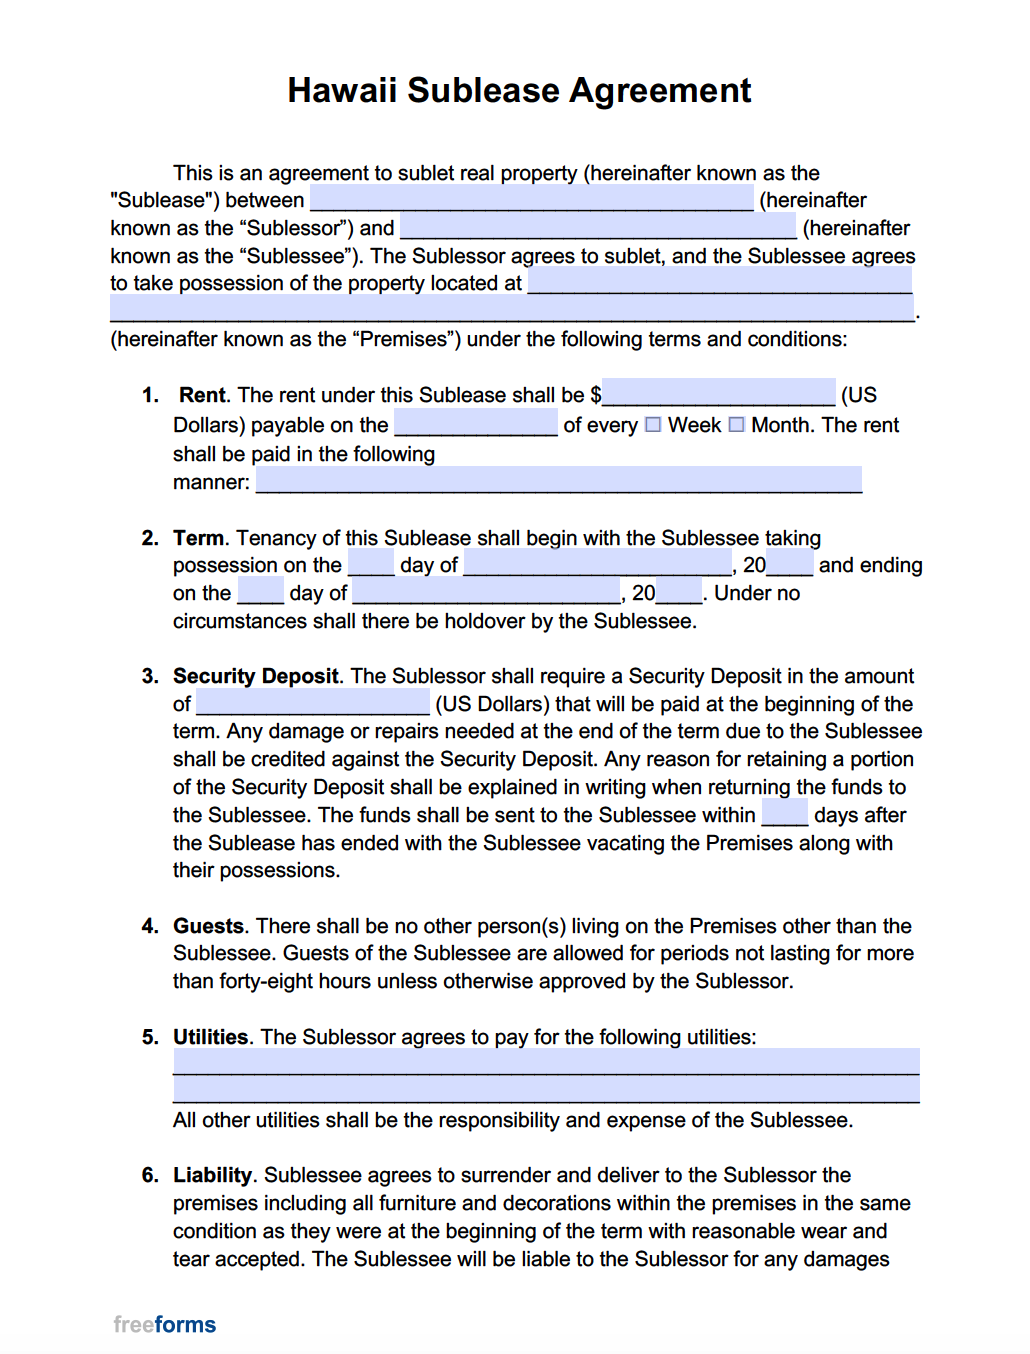 free-hawaii-sublease-agreement-template-pdf-word